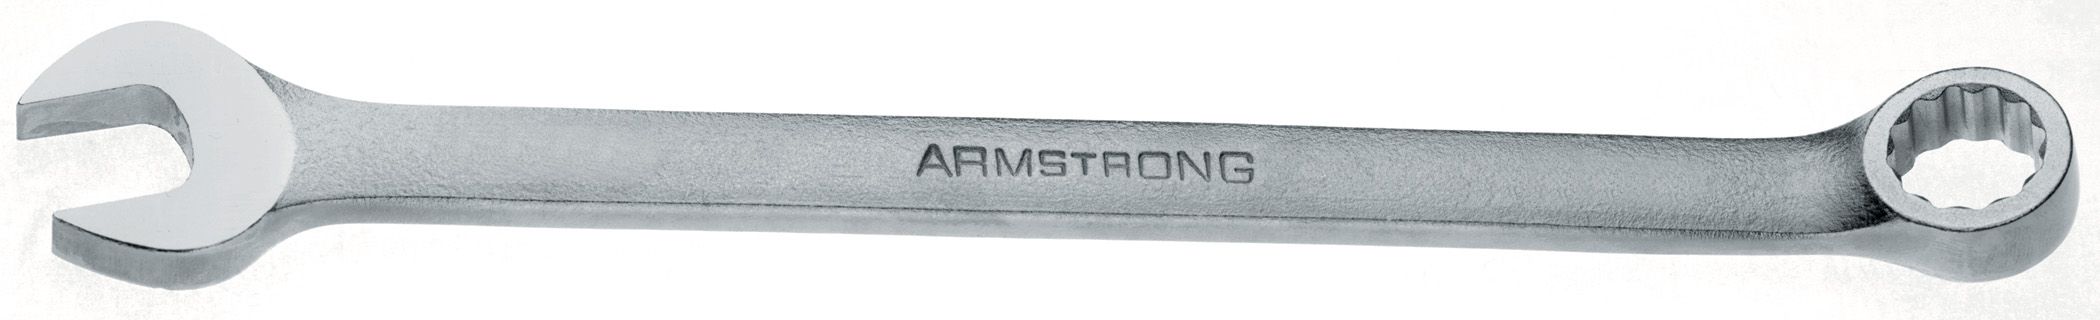 Armstrong 9 mm 12 pt. Satin Finish Long Combination Wrench